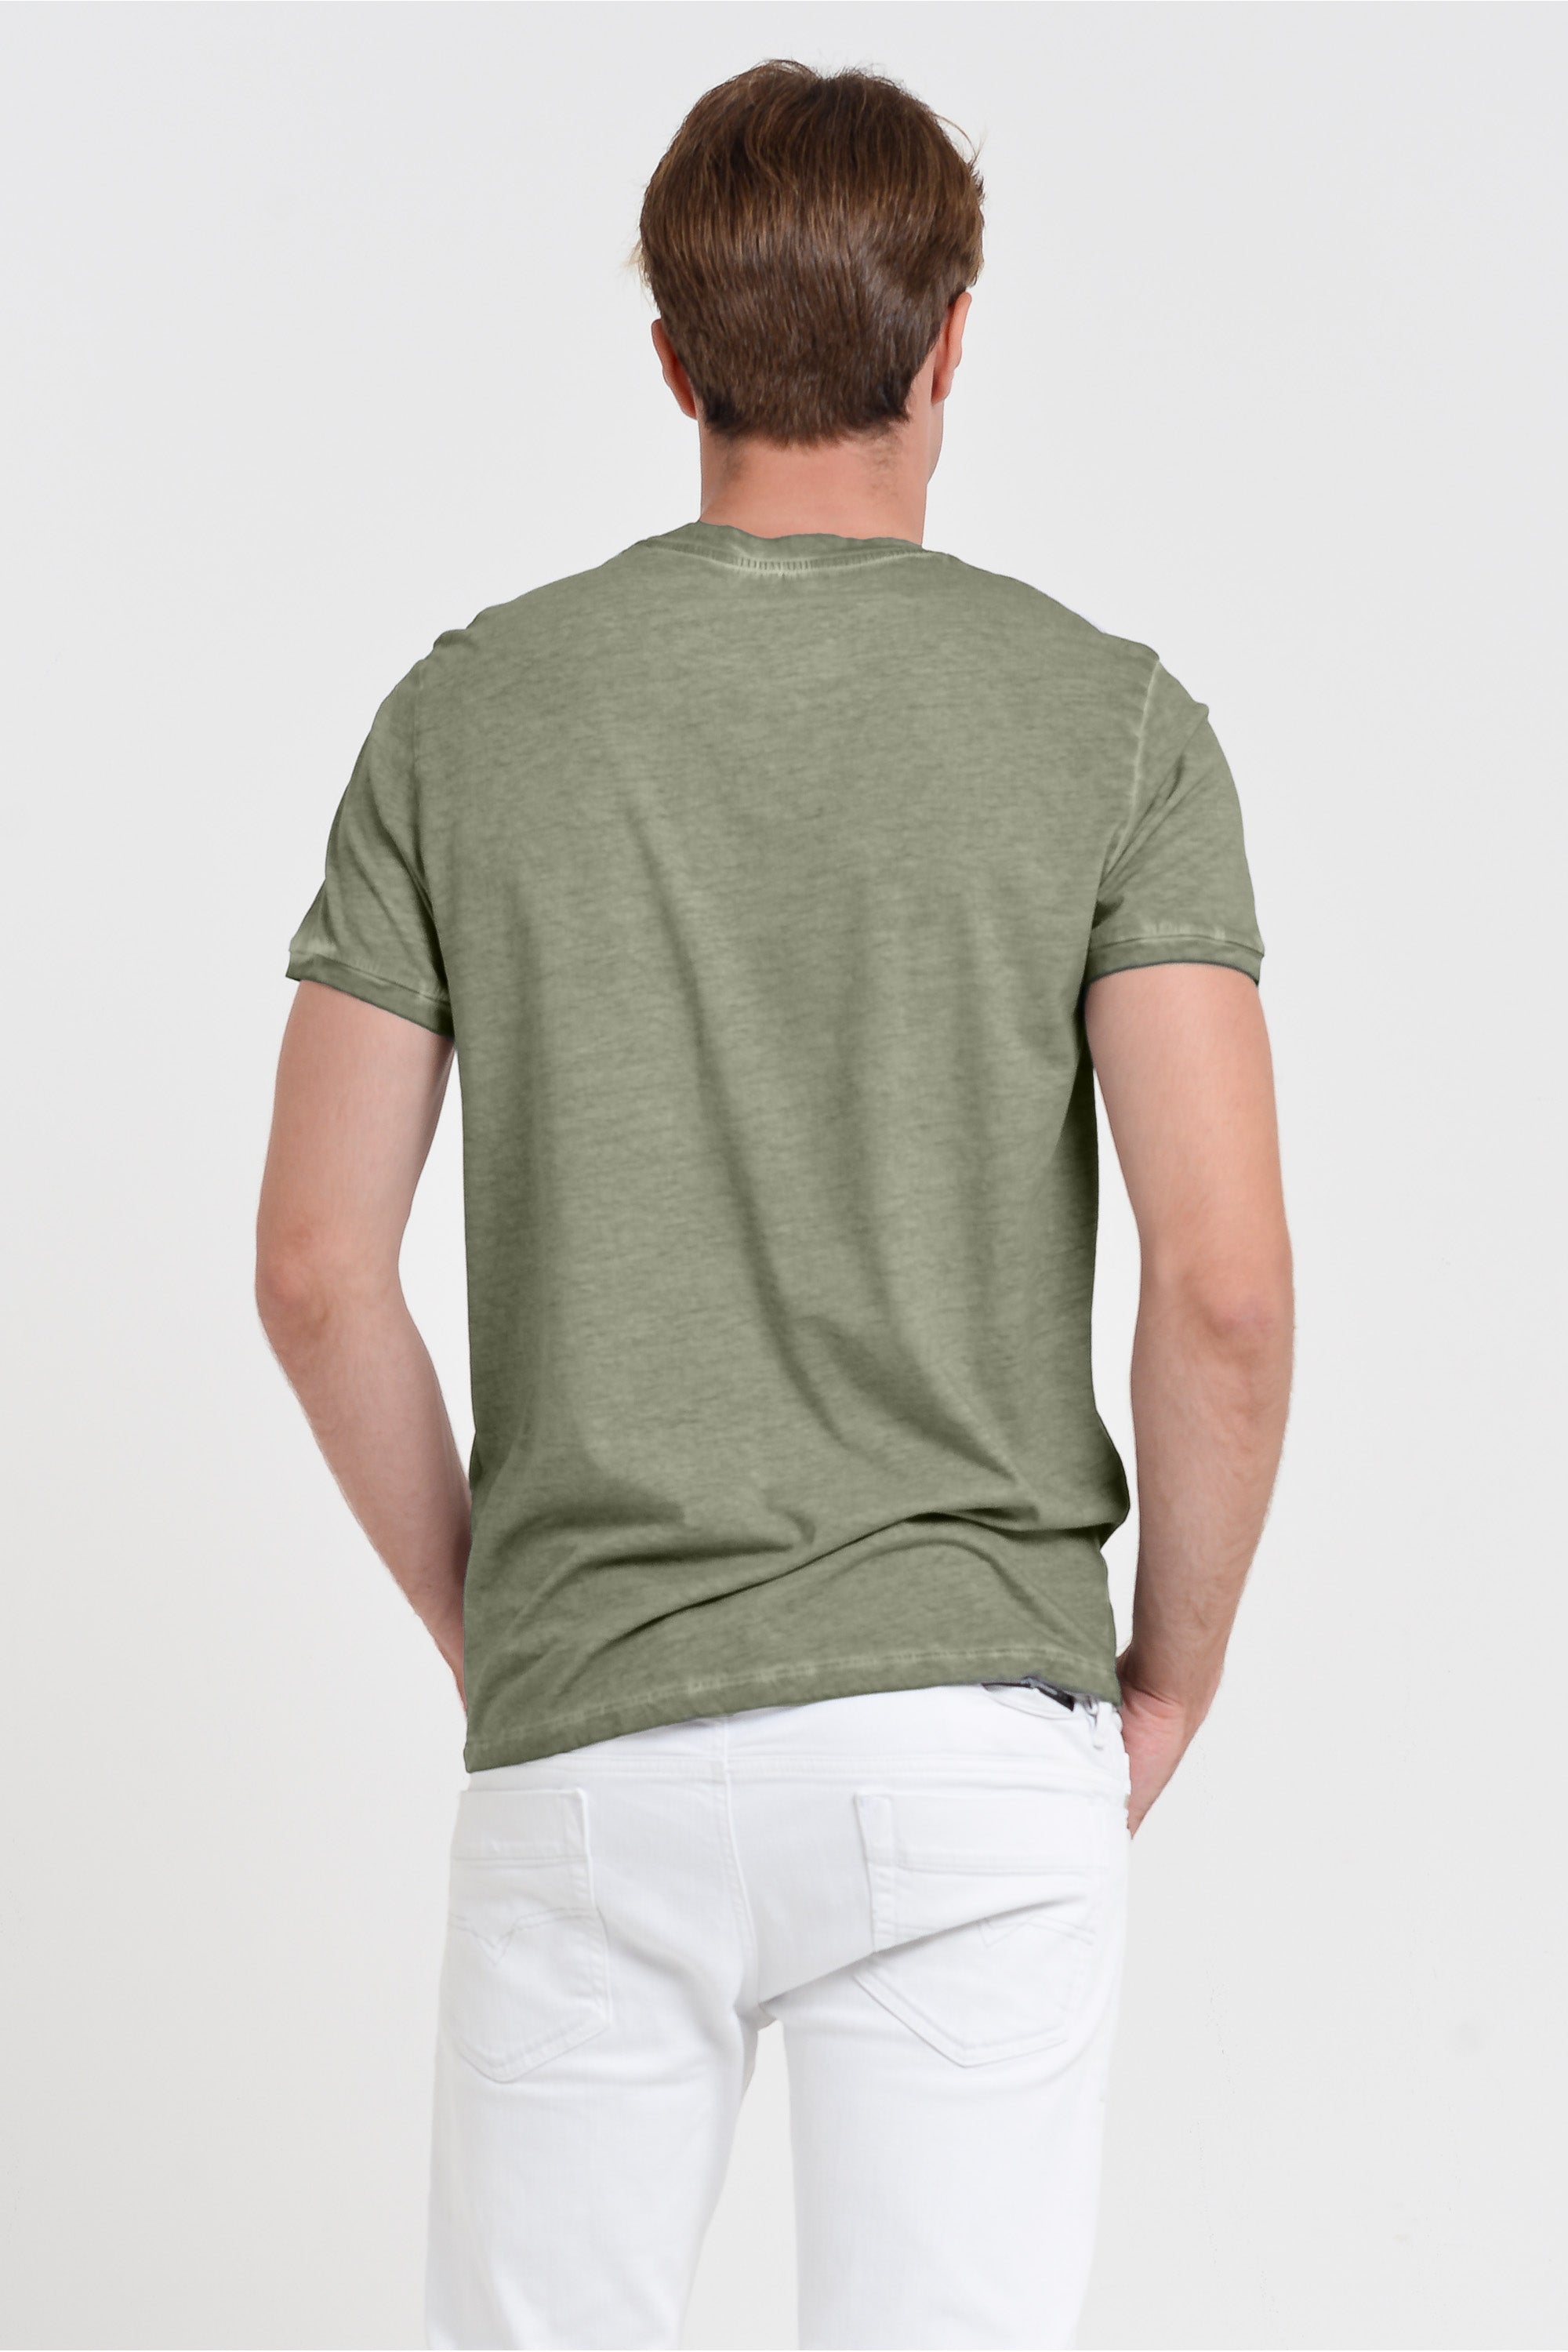 T-Shirt Basic - Willy's